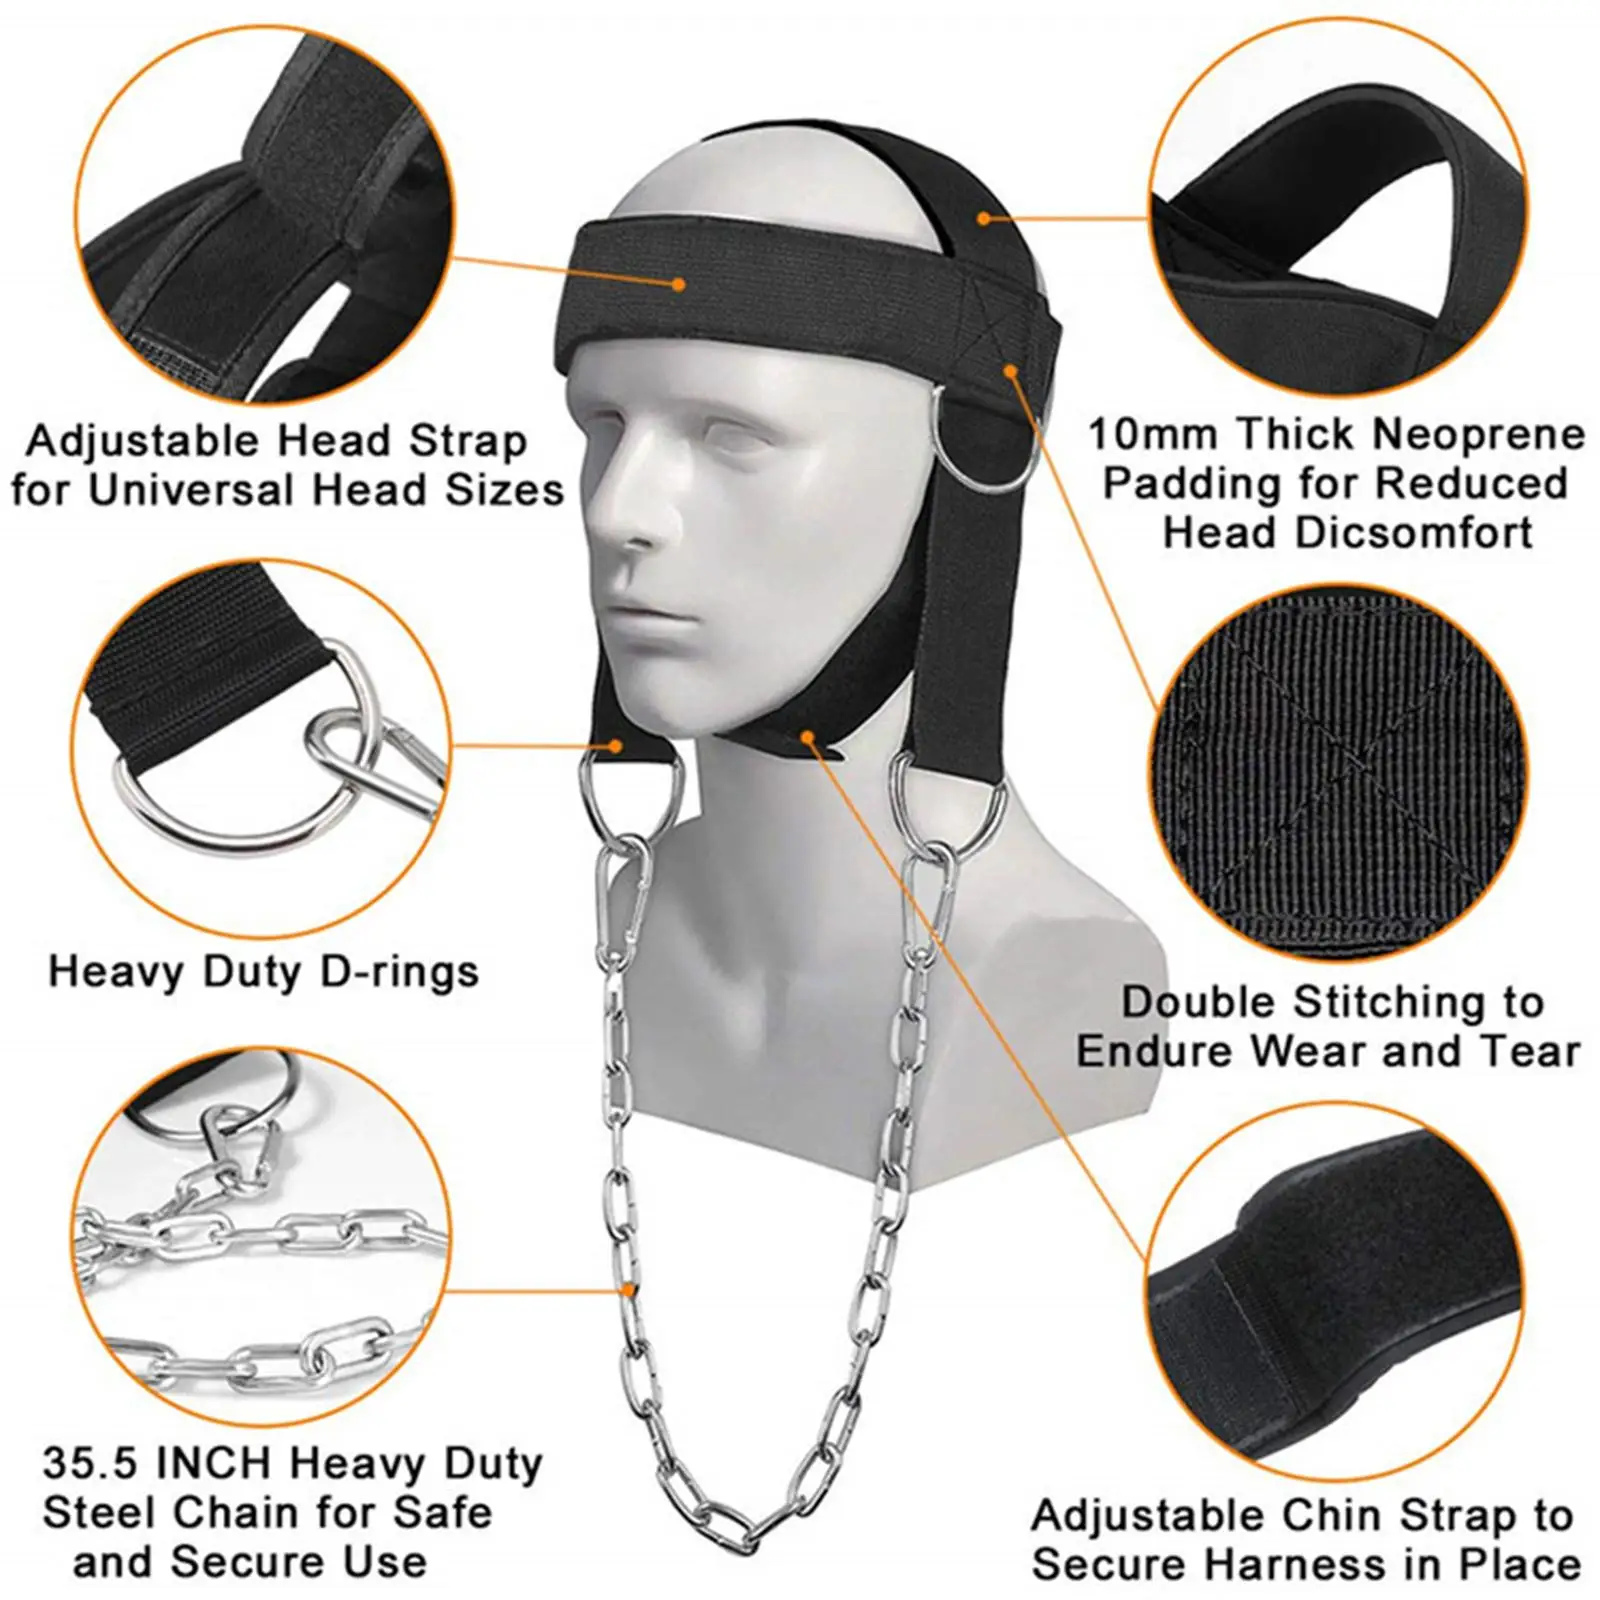 Head Neck Harness Equipment Black Durable Support for Weight Lifting Sports